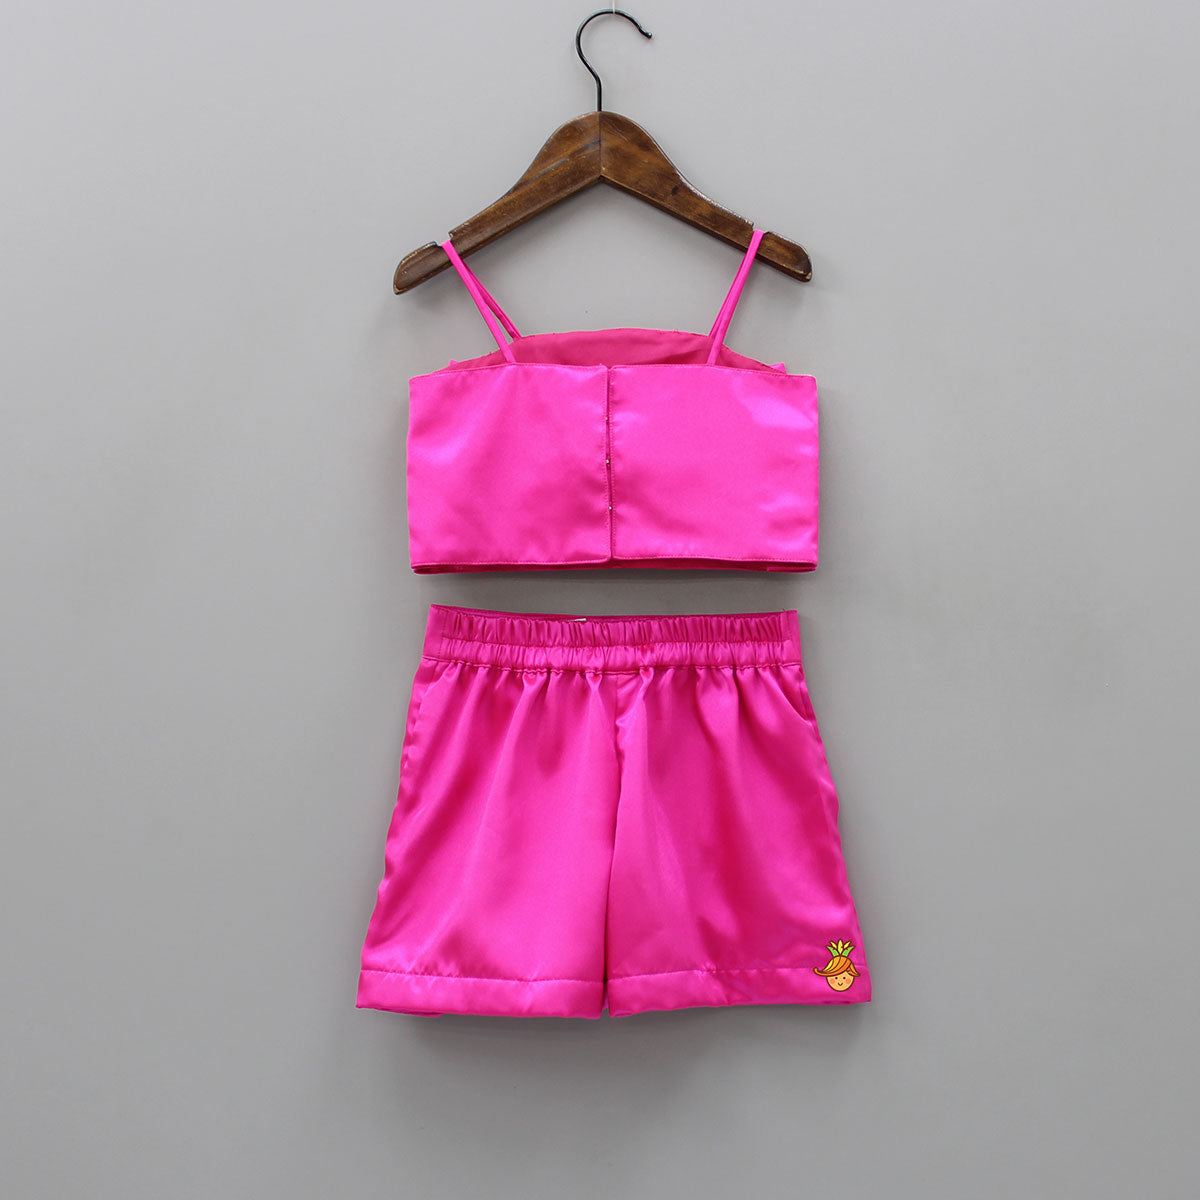 Spaghetti Straps Rani Pink Bowie Top And White Stones Adorned Shorts